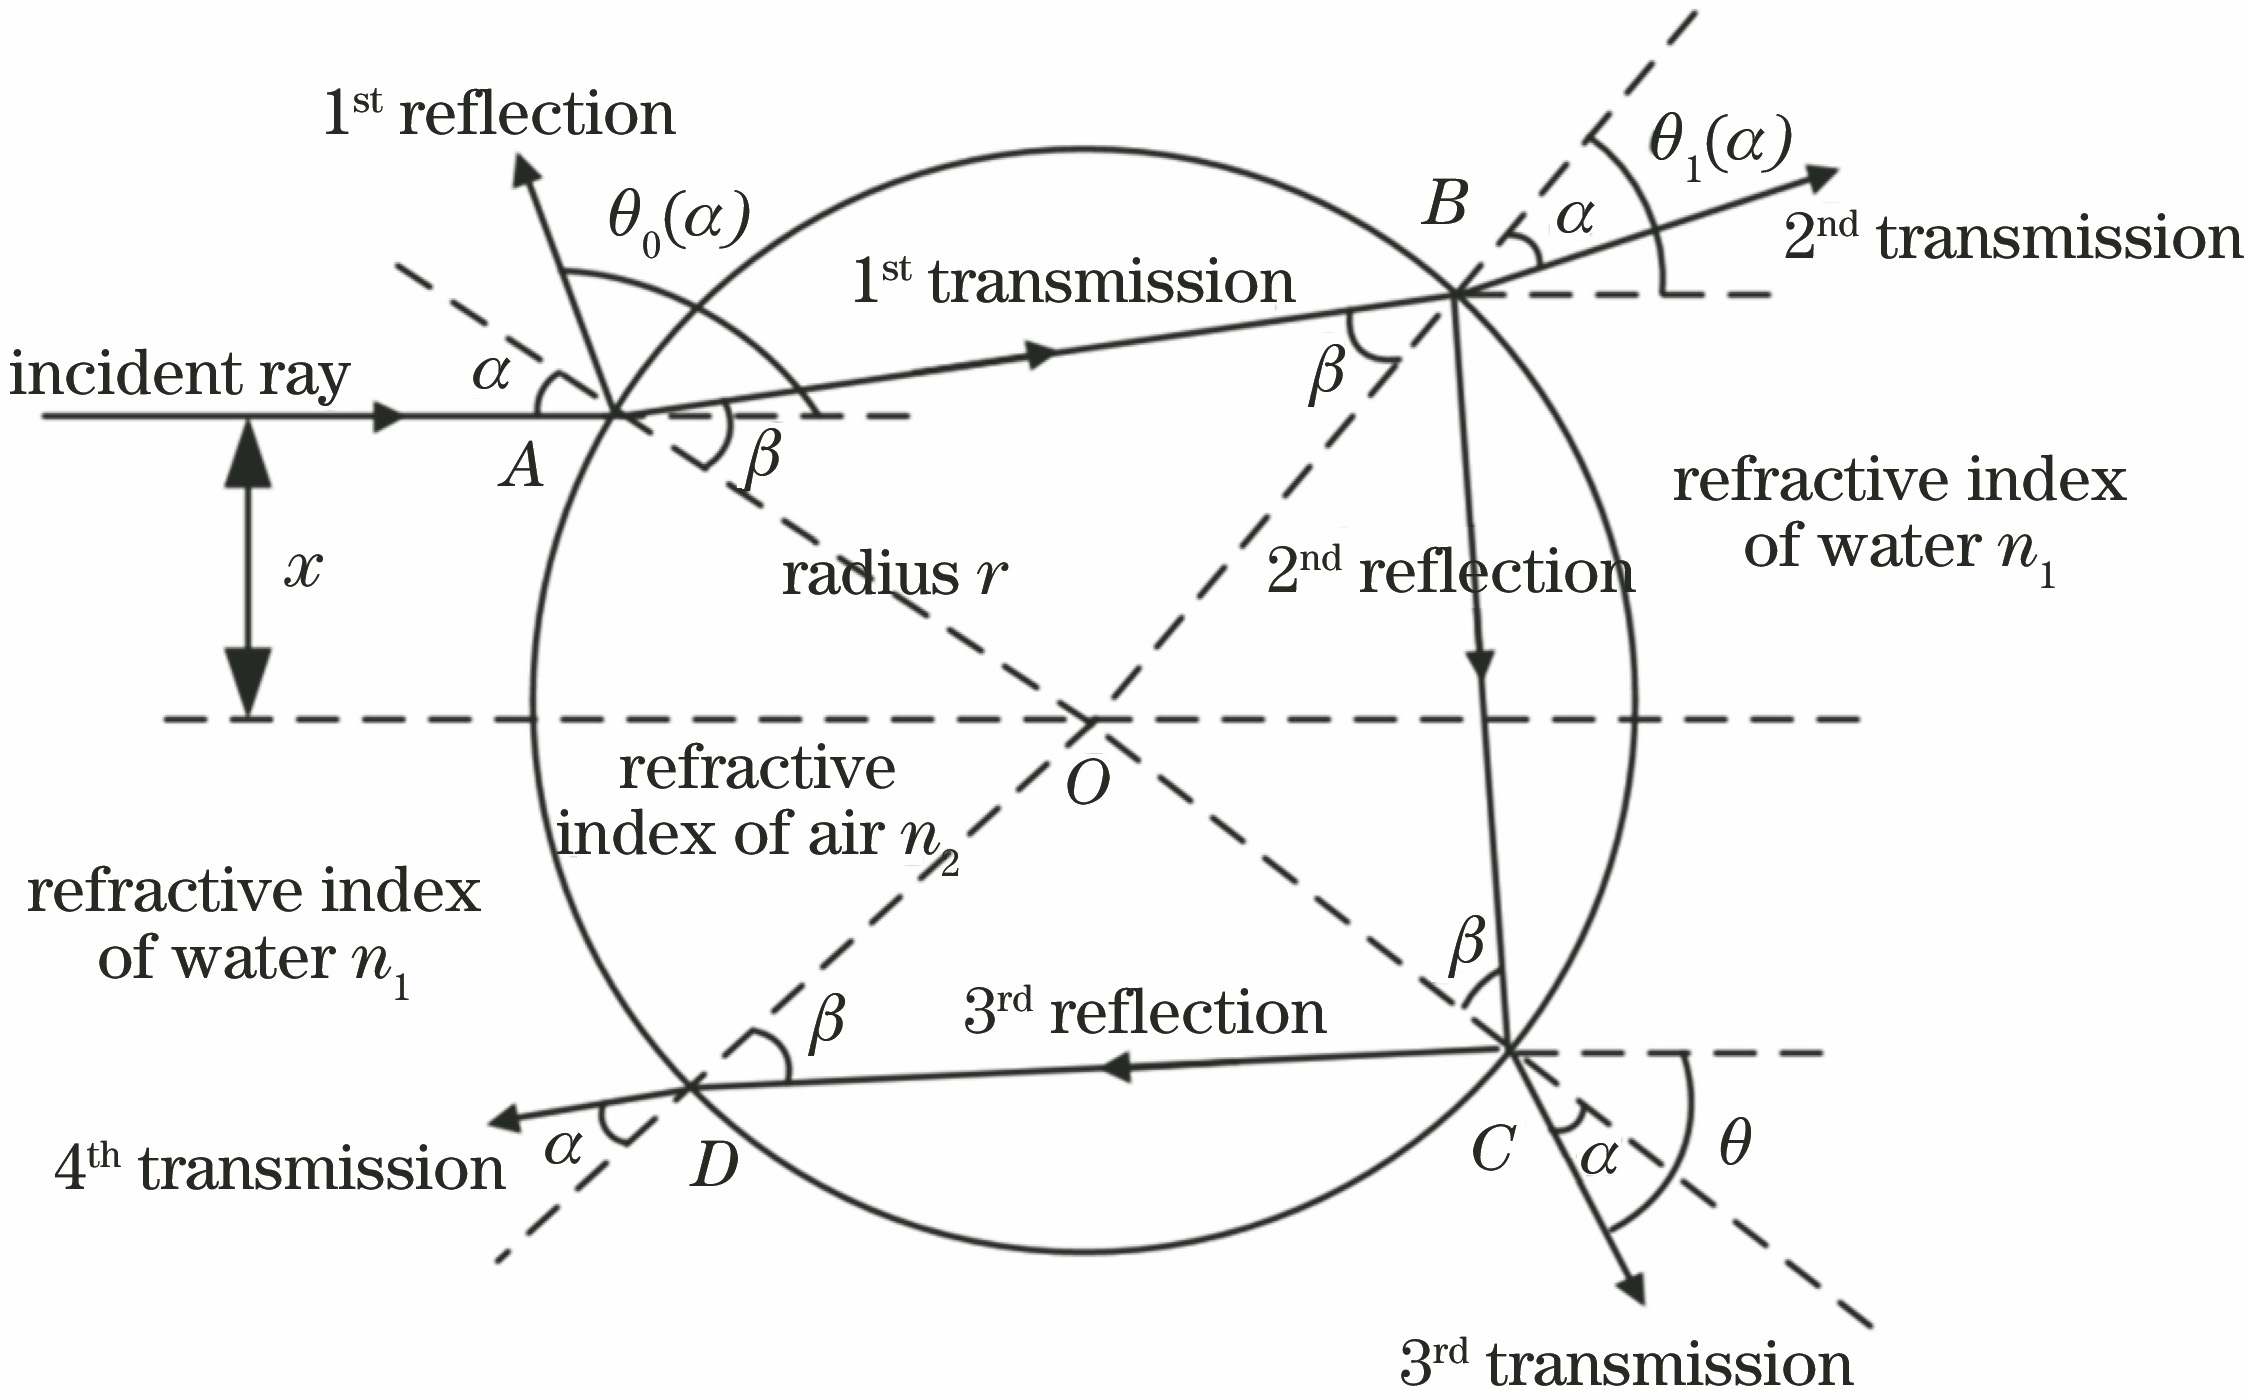 GOM theory model and the transmission path of light on the interface of bubble